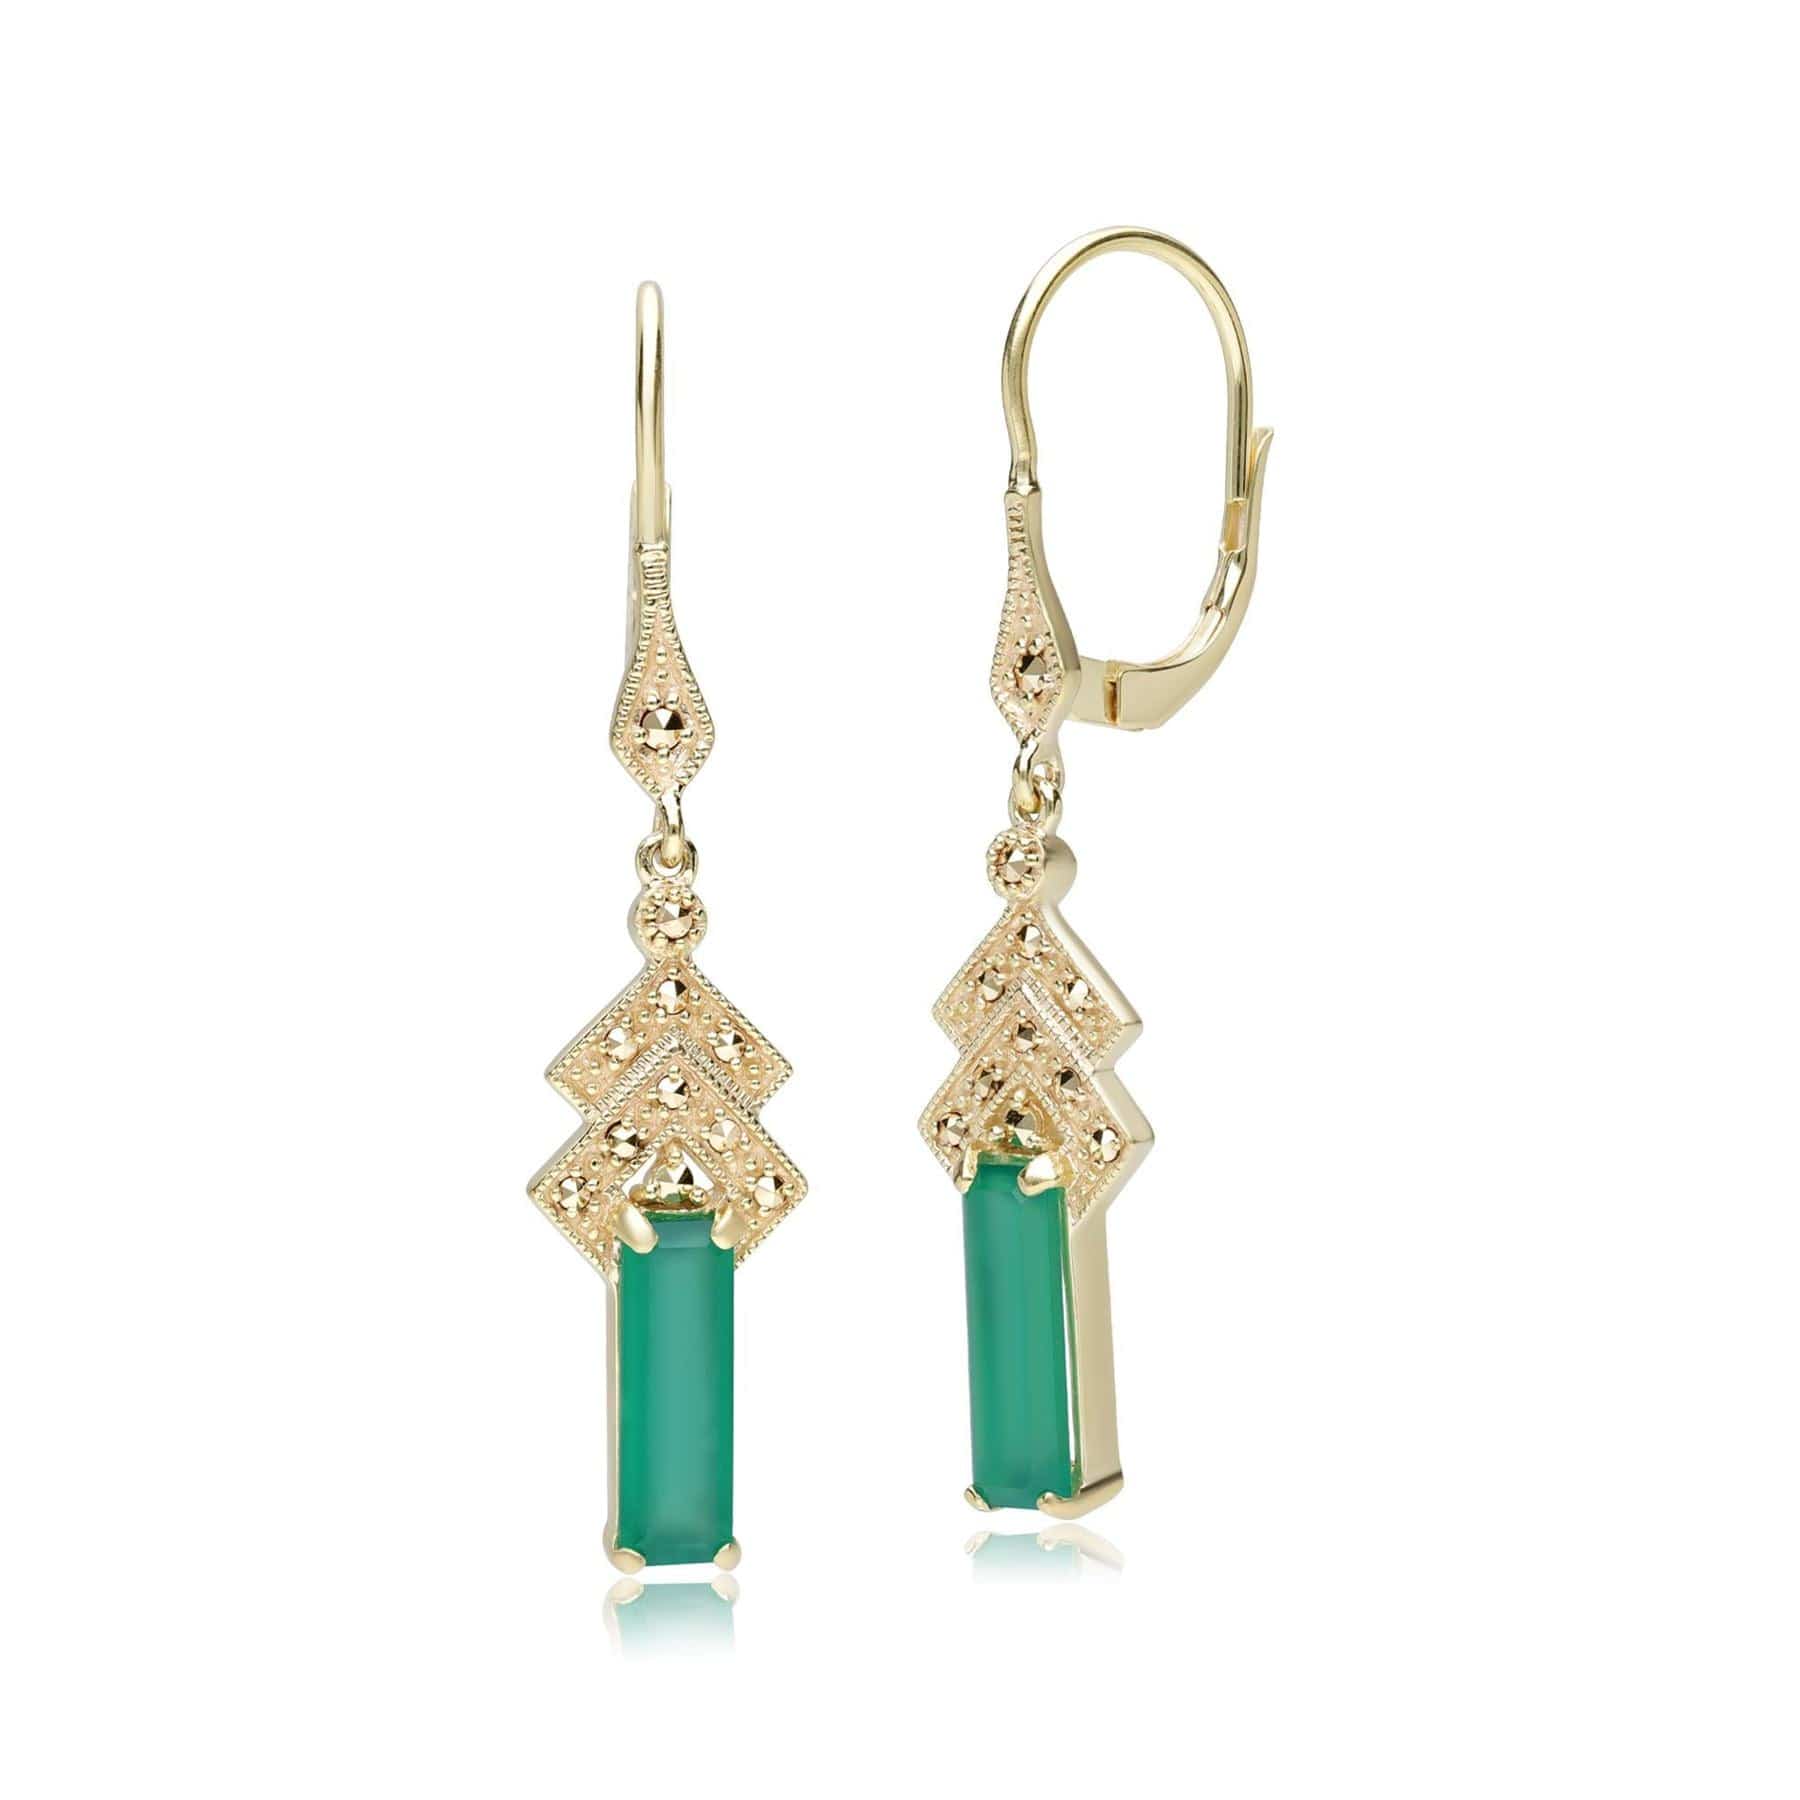 Art Deco Inspired Dyed Green Chalcedony & Marcasite Drop Earrings in 18ct Gold Plated Silver